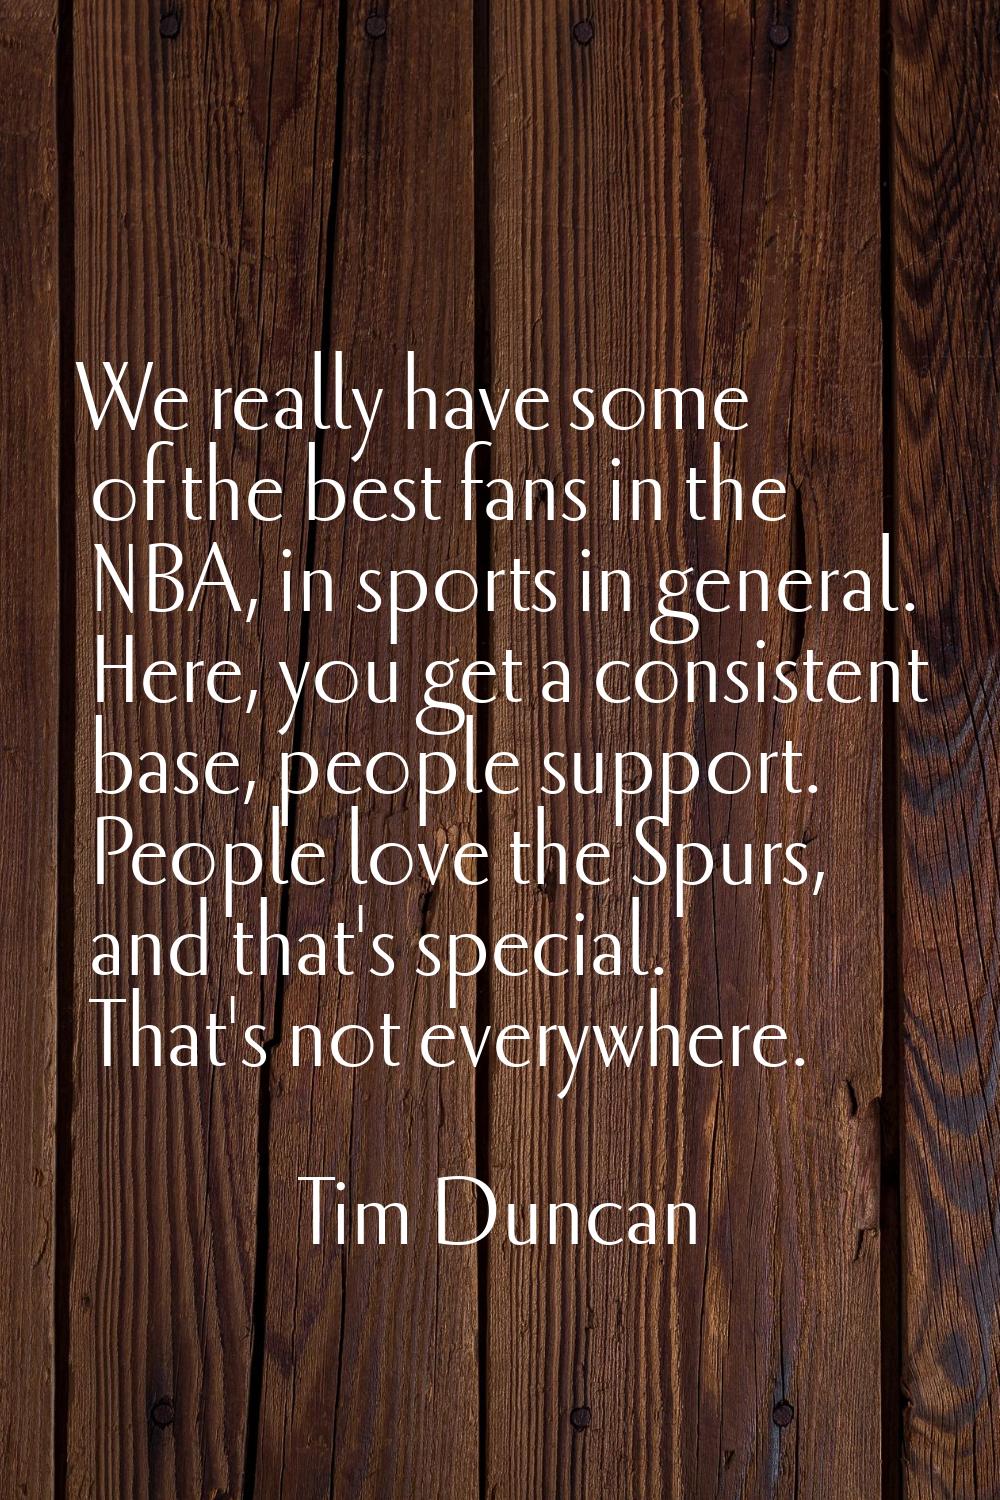 We really have some of the best fans in the NBA, in sports in general. Here, you get a consistent b